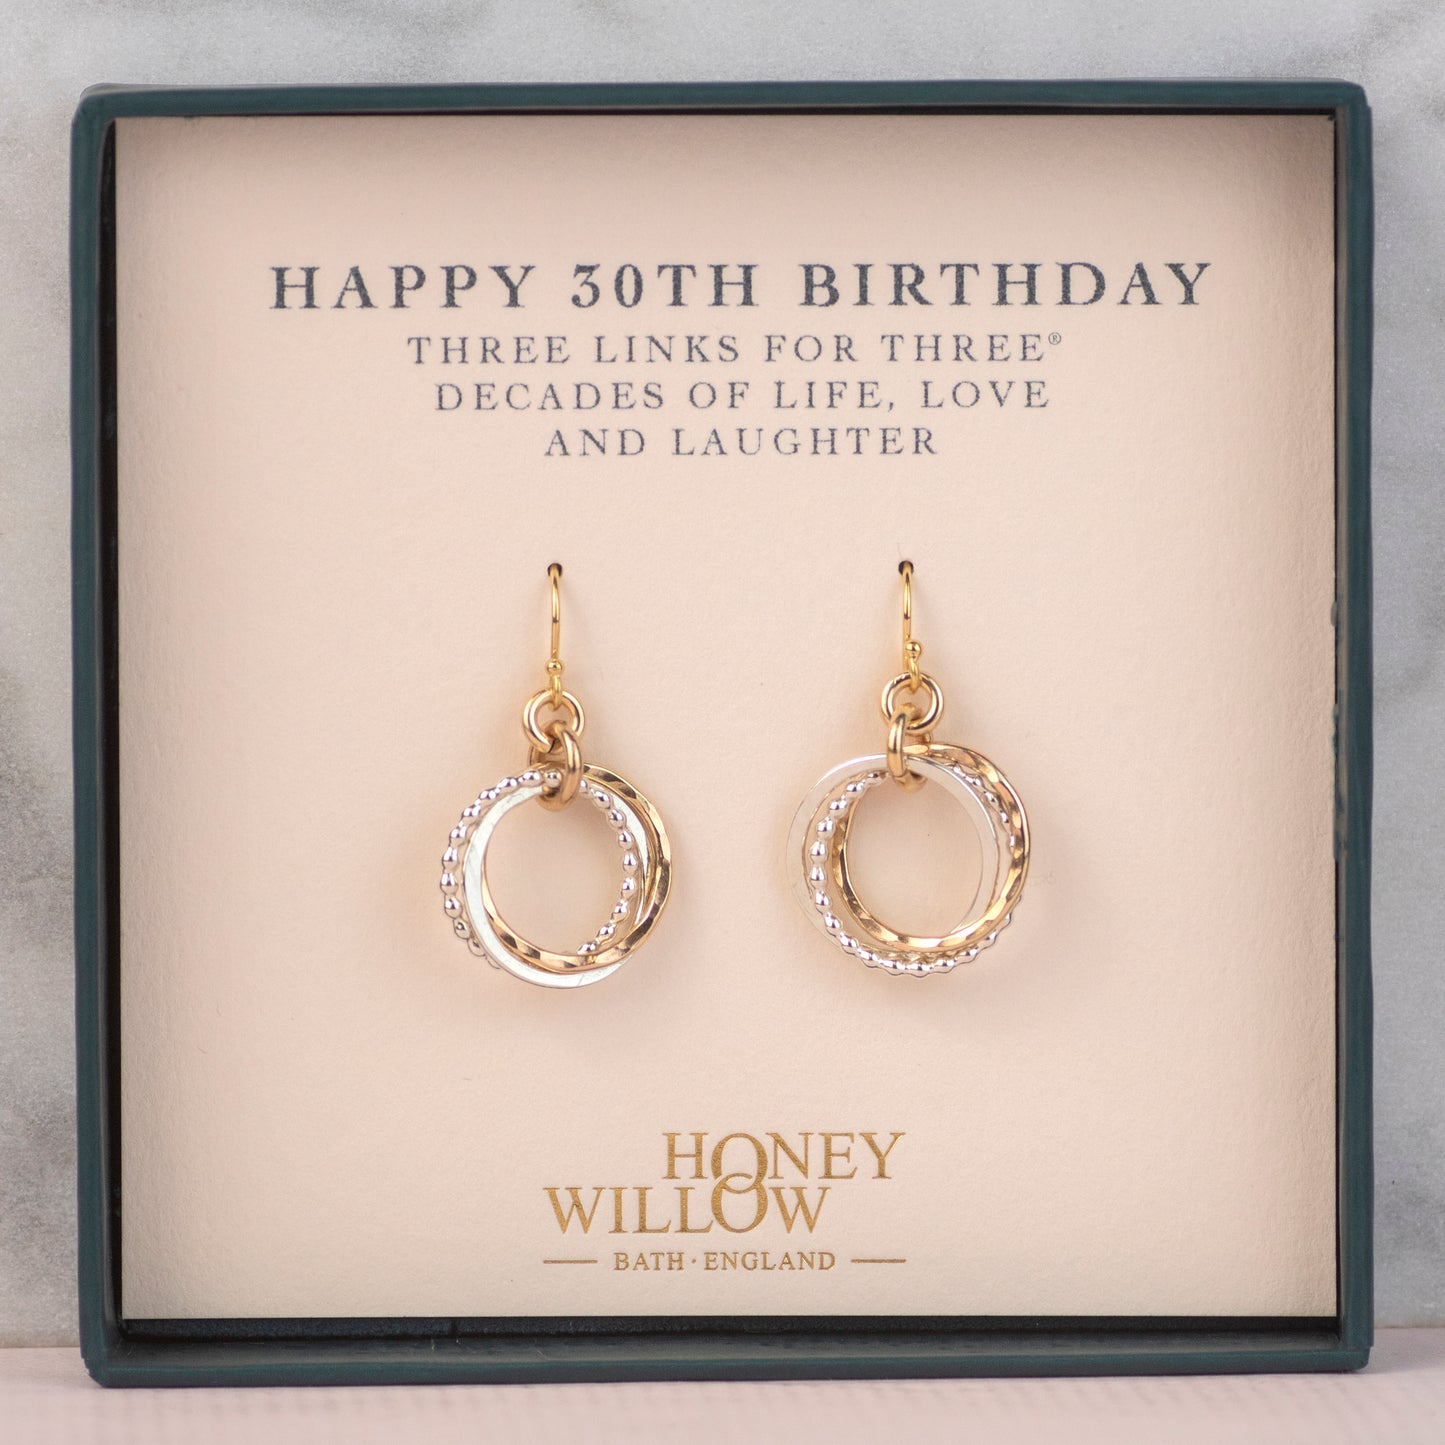 30th Birthday Earrings - Petite Mixed Metal - The Original 3 Links for 3 Decades Necklace